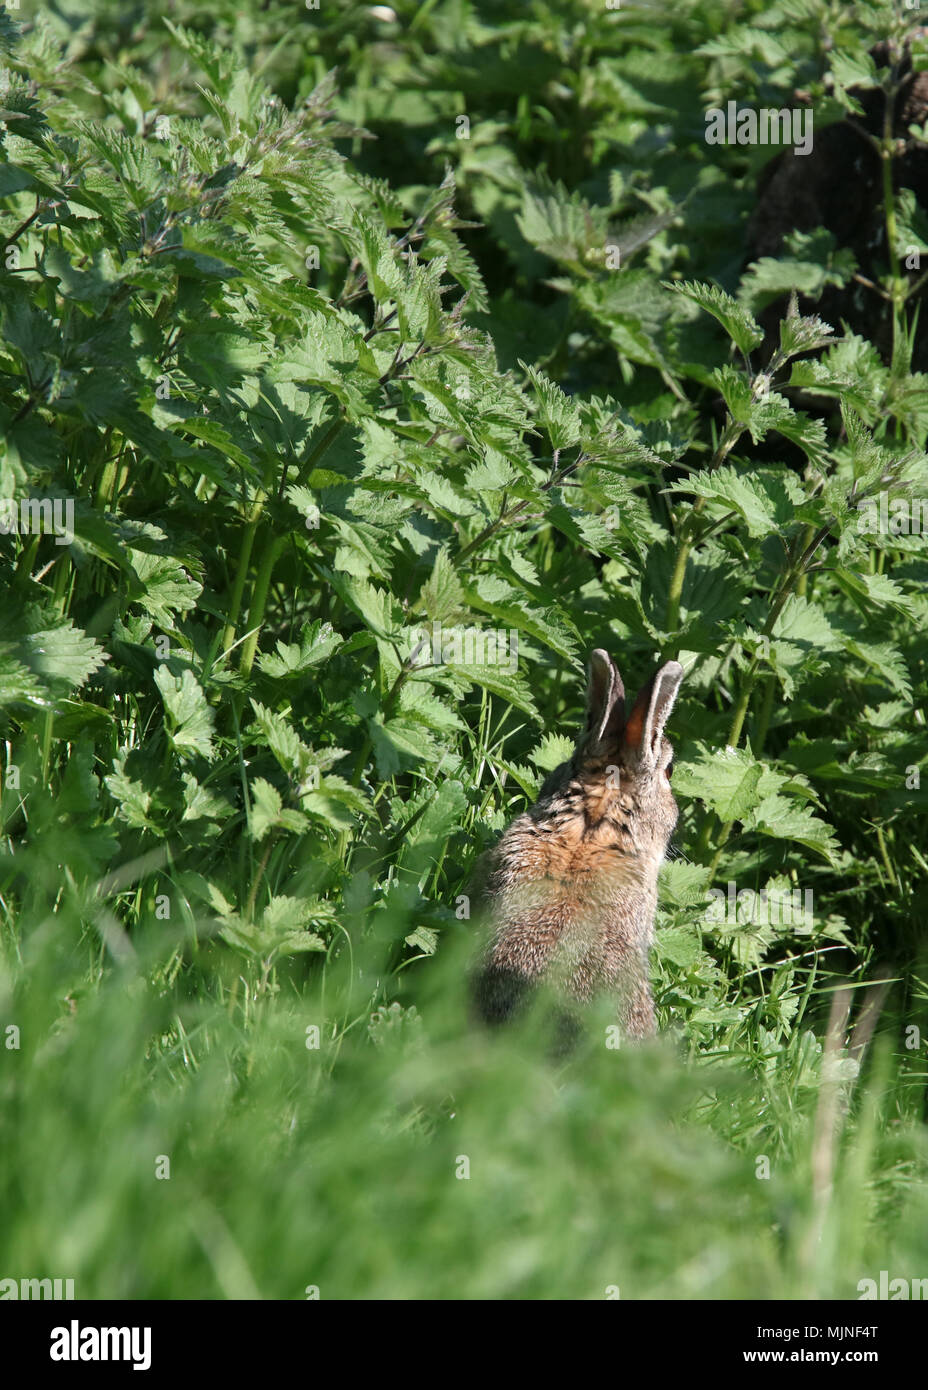 May 2018 - Wild rabbits in Rural Somerset, in this shot from behind you can see the rabbits field of view as you can still see its eye. Stock Photo